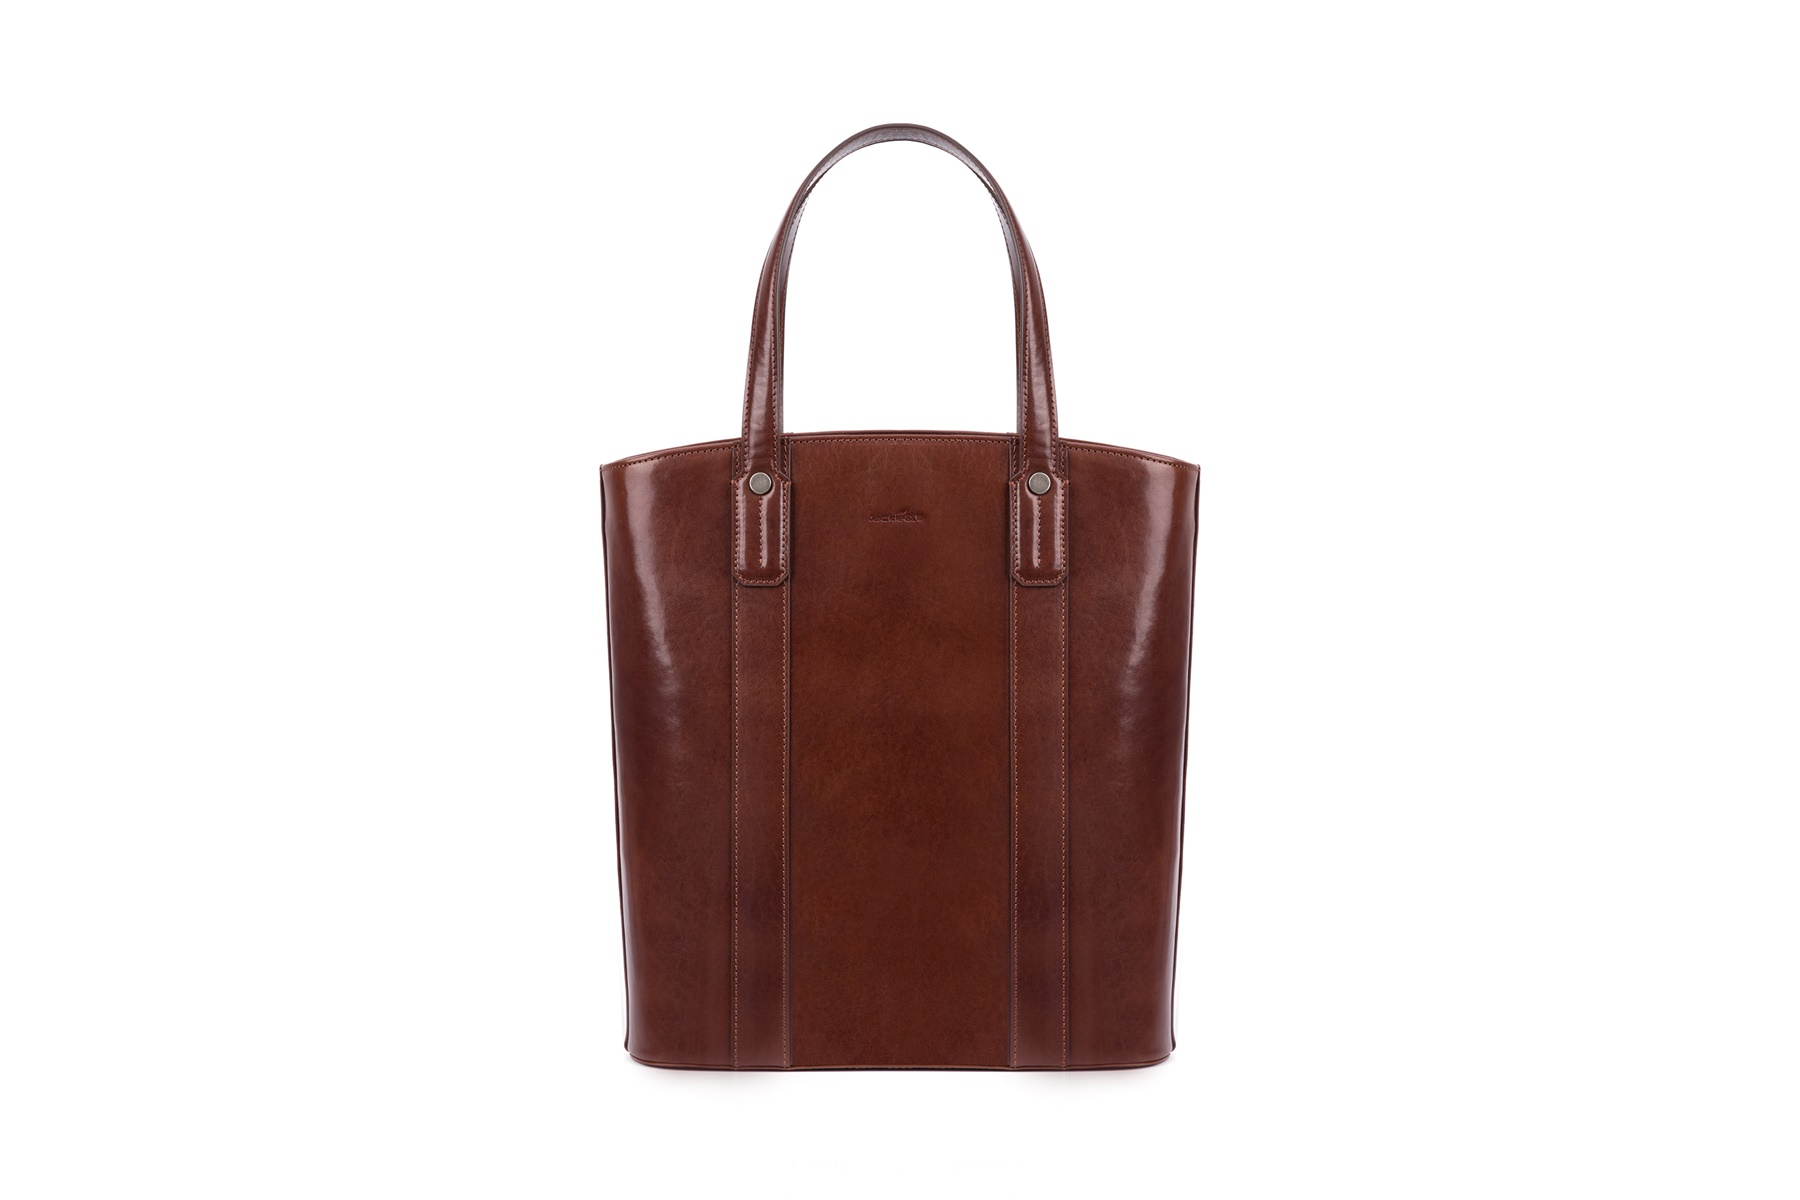 Tote leather handle with zipper closure